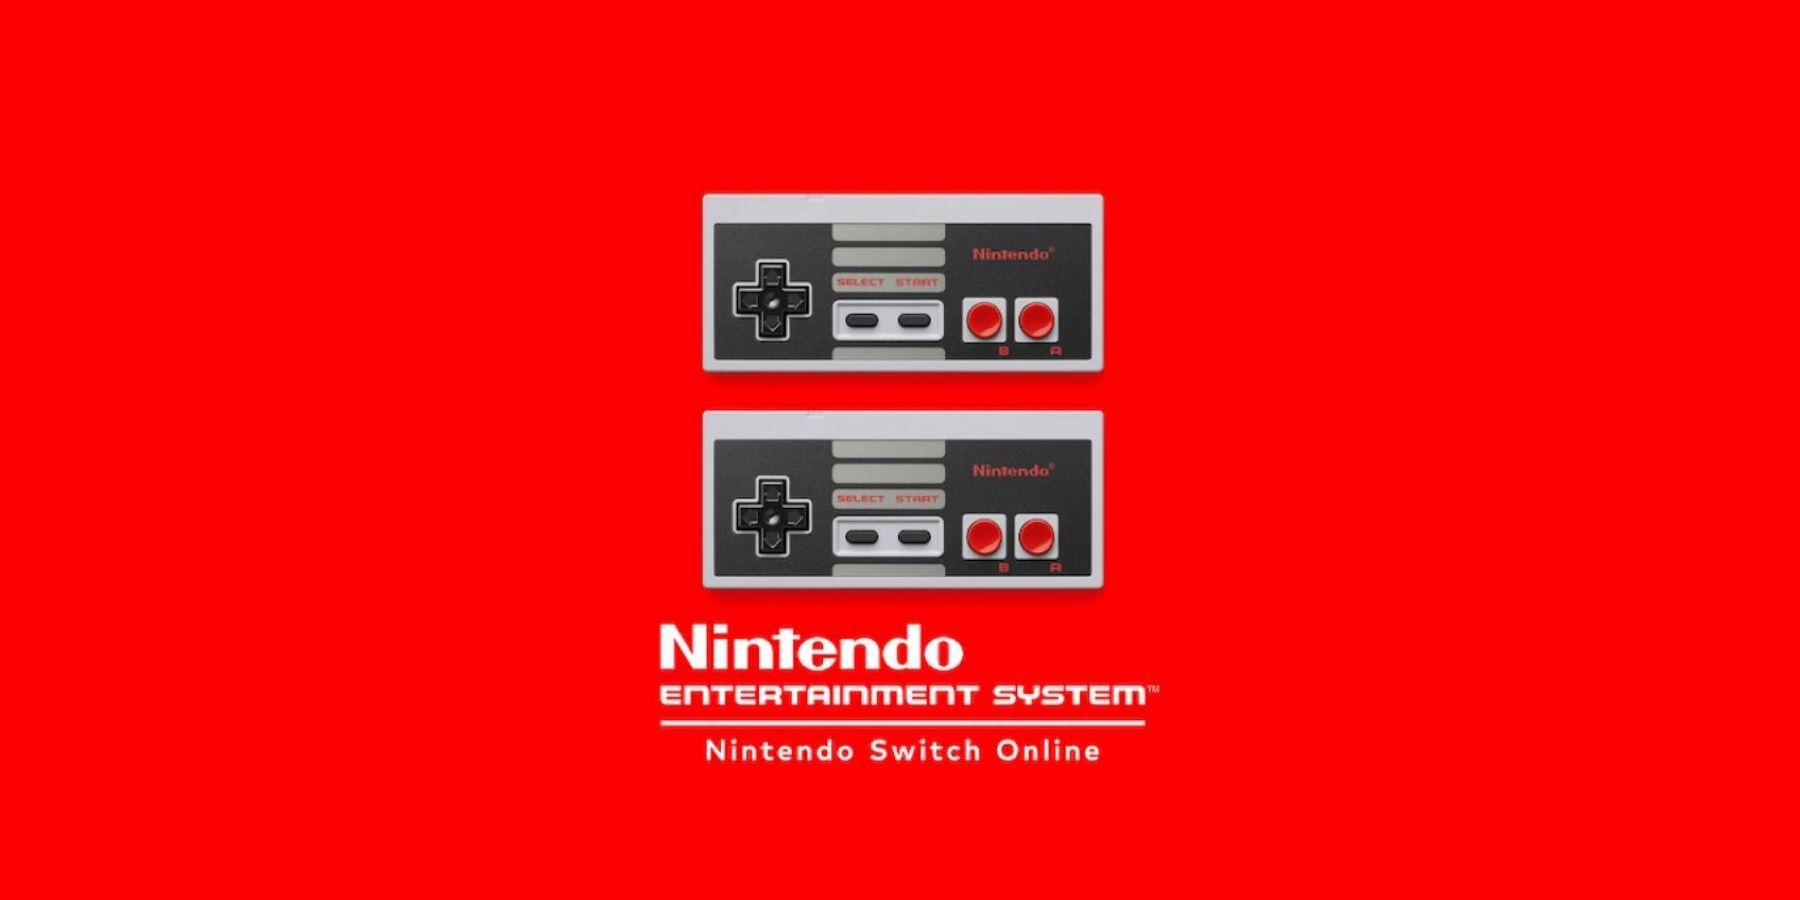 Banner for the Nintendo Entertainment System games on Nintendo Switch Online featuring two NES controllers